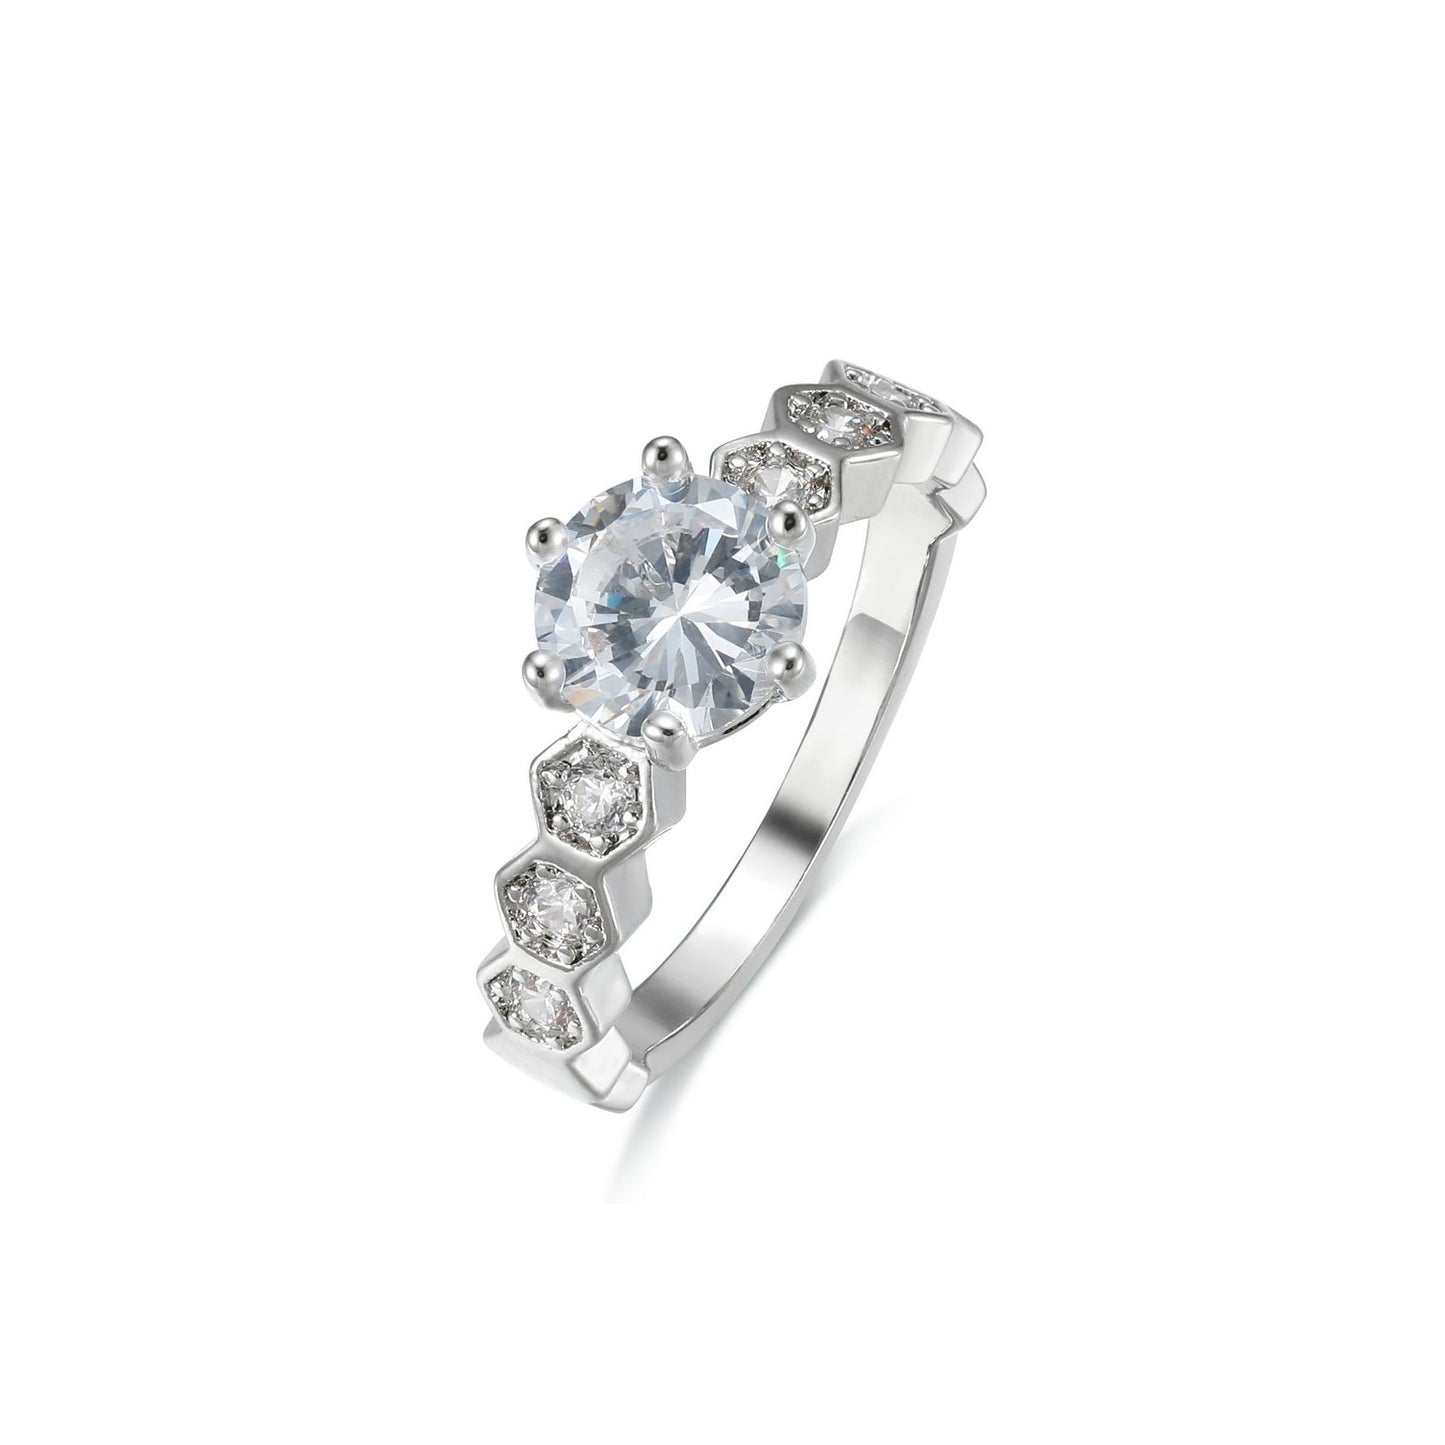 Honey Bee - Solitare CZ Ring with Hexagon Band set with Small Cubic Zirconia from Frinkle